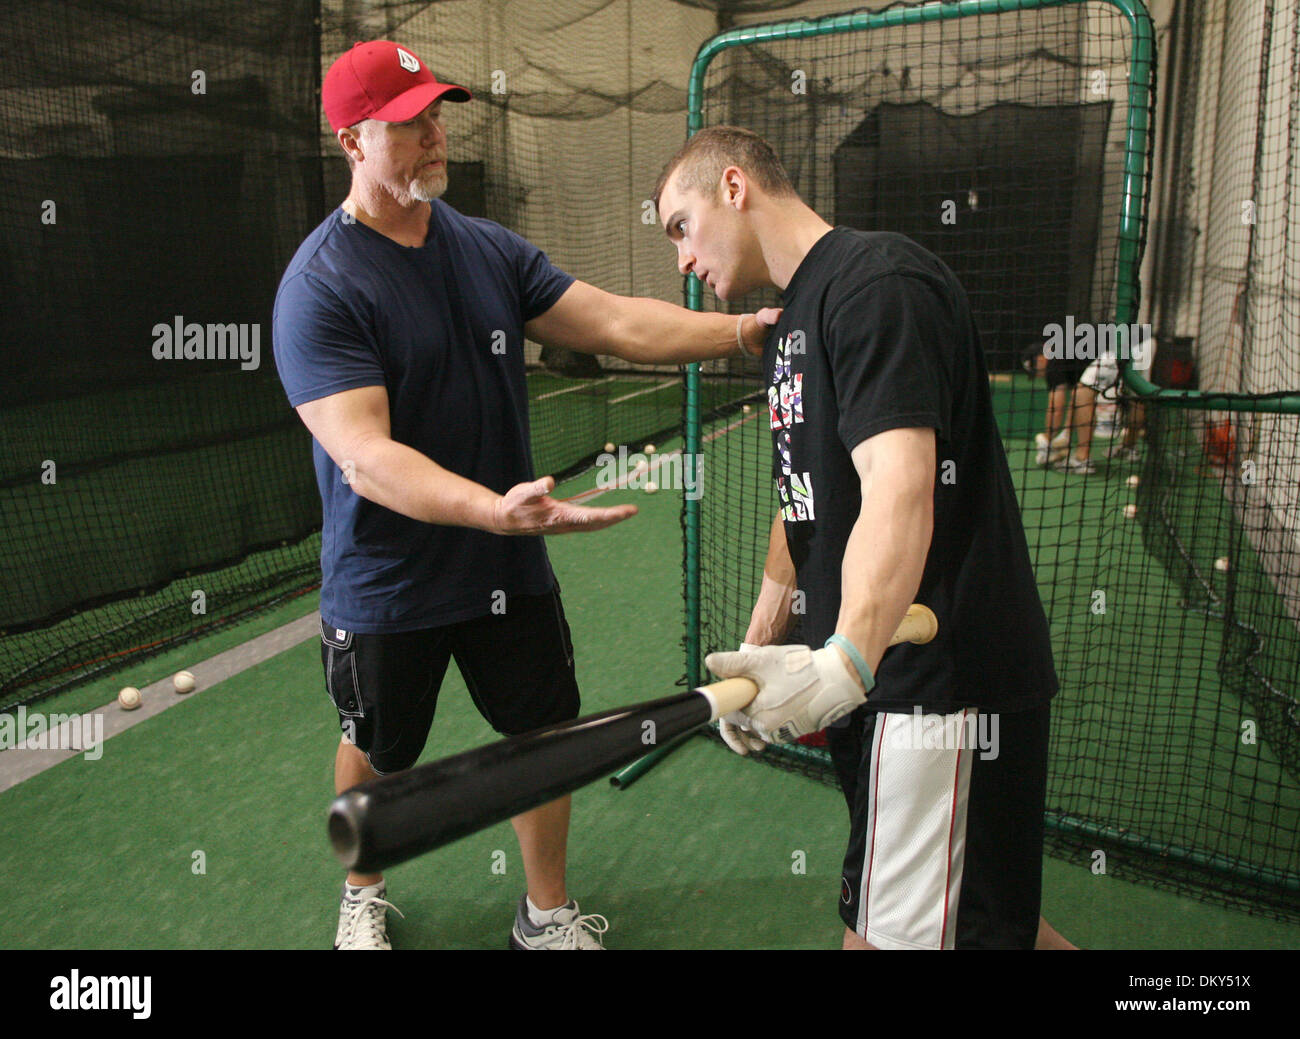 Jan 13, 2010 - Huntington Beach, California, USA - Cardinals hitting coach MARK MCGWIRE (left) works with infielder BRENDAN RYAN during a training session at a local baseball practice facility in Huntington Beach, Calif. The session with the Cardinals infielders was the first McGwire had had since his announcement Monday that he used performance enhancing drugs during his career. ( Stock Photo